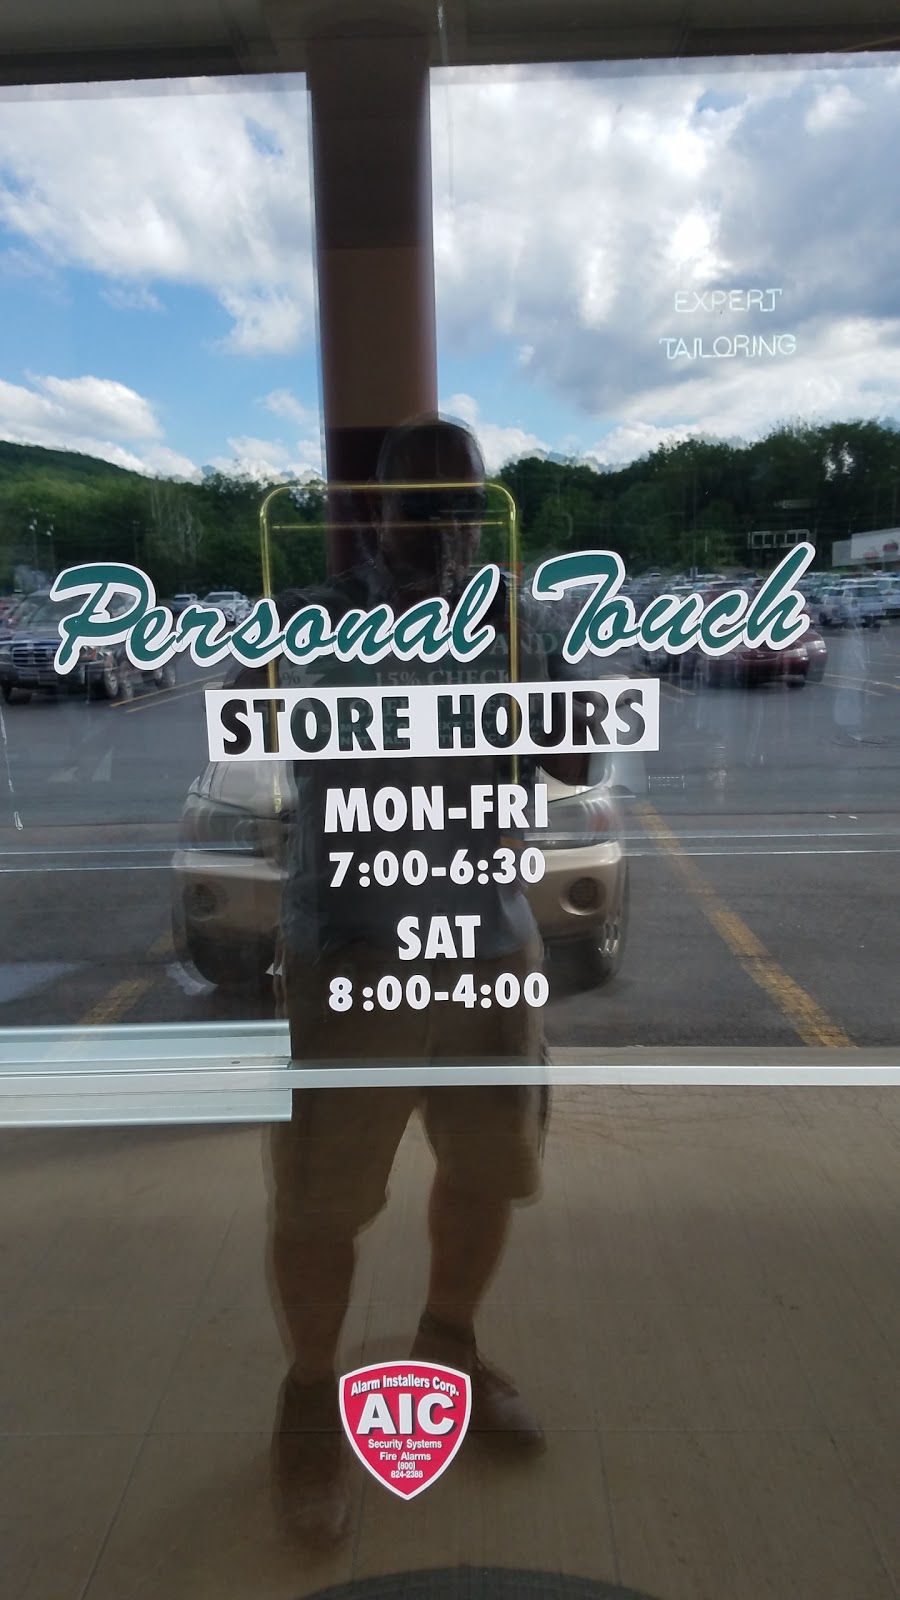 Personal Touch Cleaners | PA-611 Weis Market Plaza, Tannersville, PA 18372 | Phone: (570) 620-2919